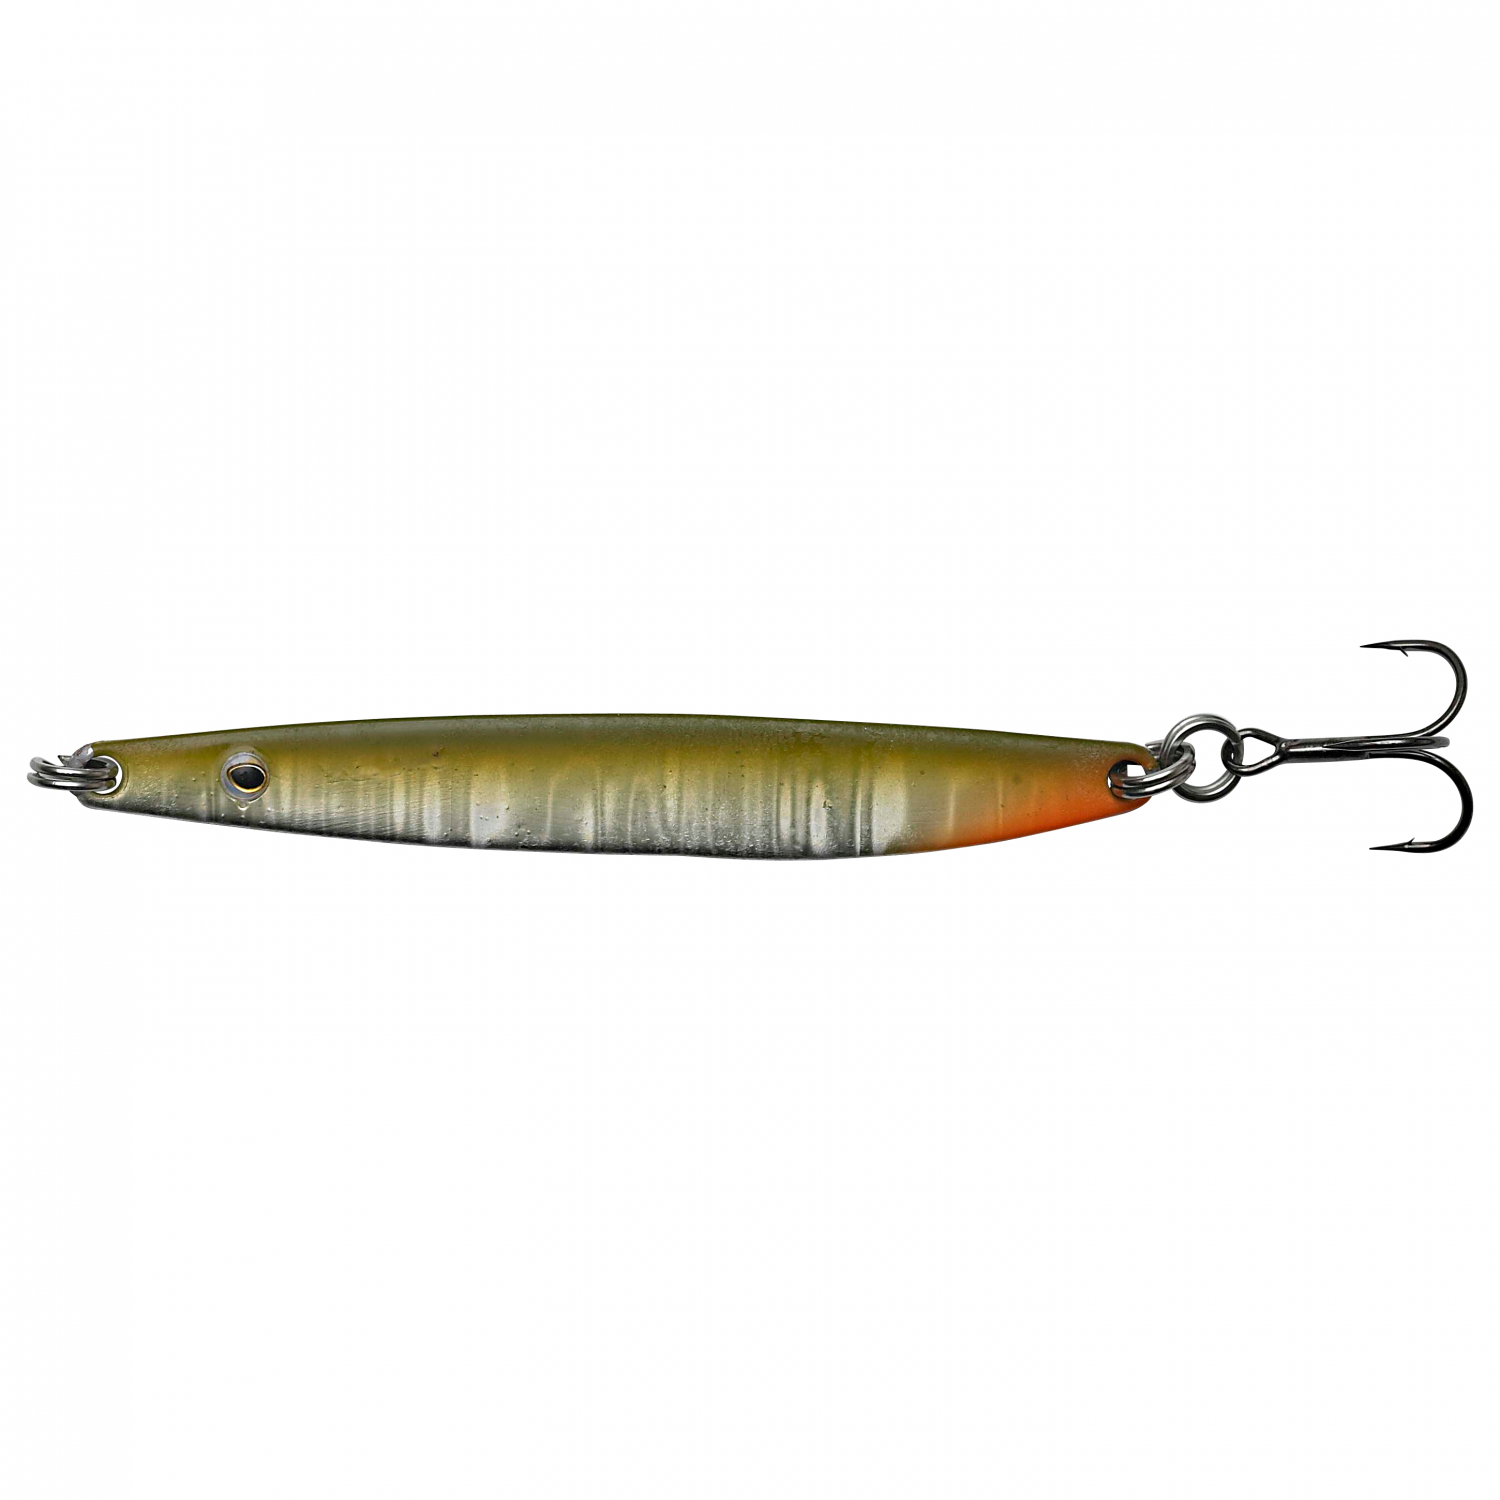 Hansen Sea Trout Spoon Flash SD Lures (Olive/Silver) 